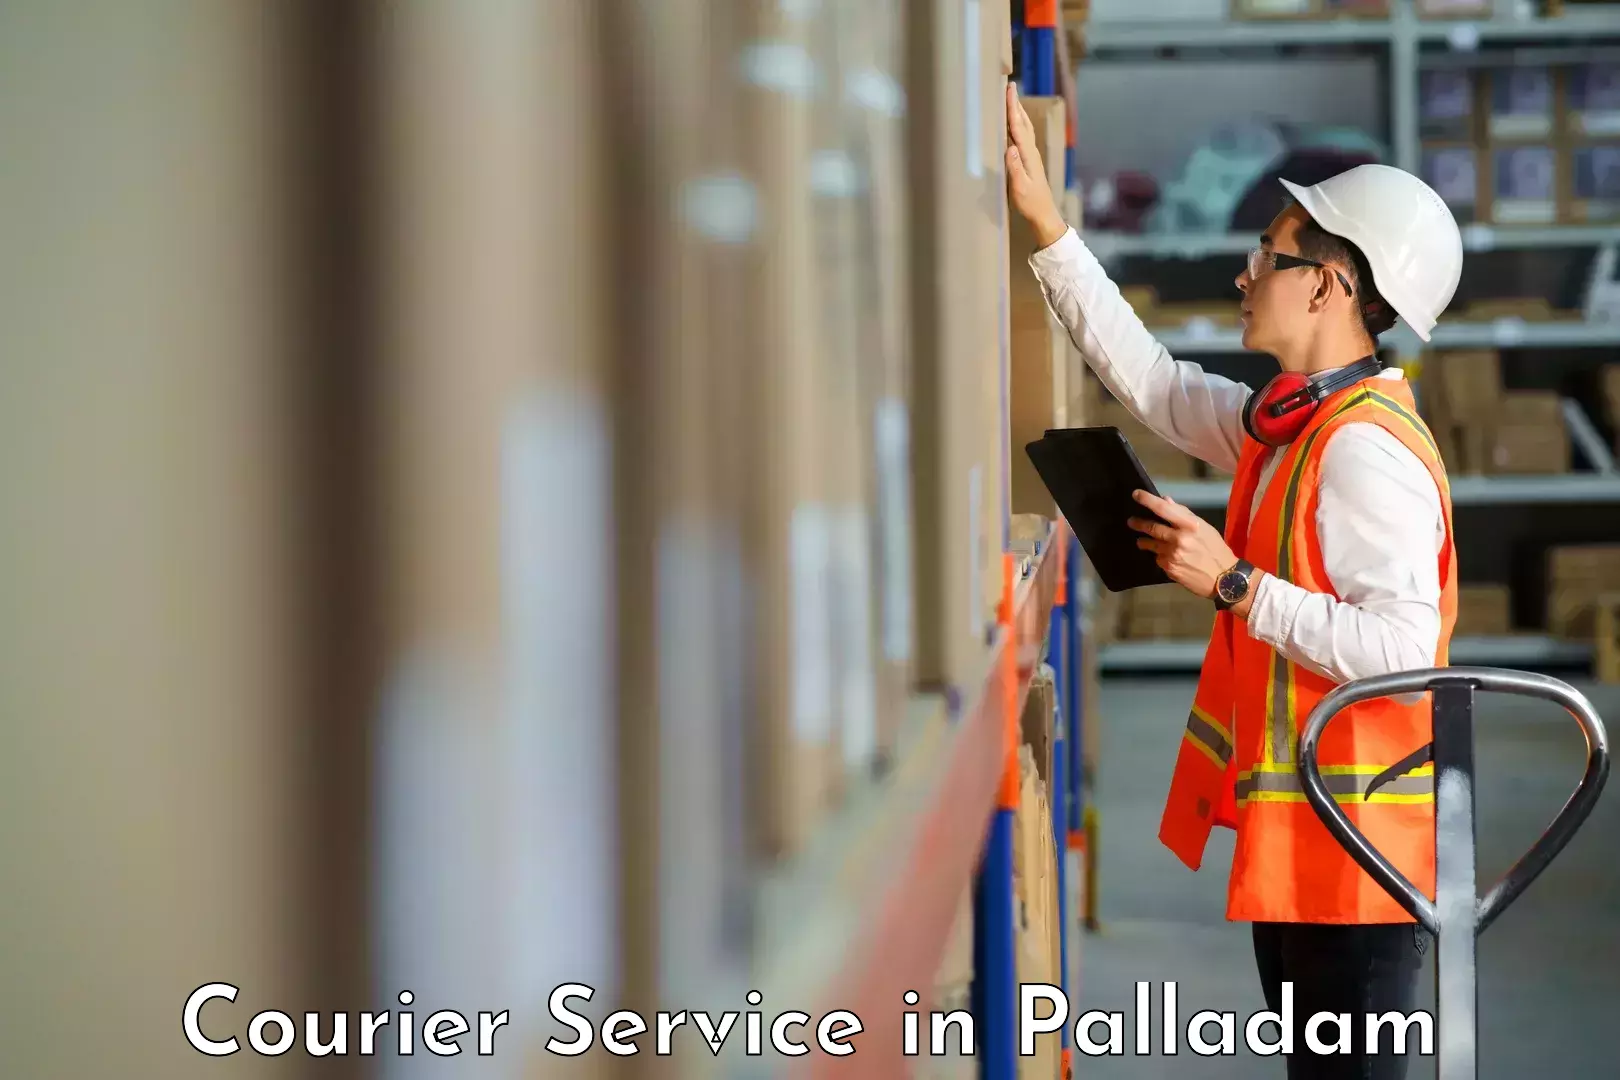 Express mail solutions in Palladam